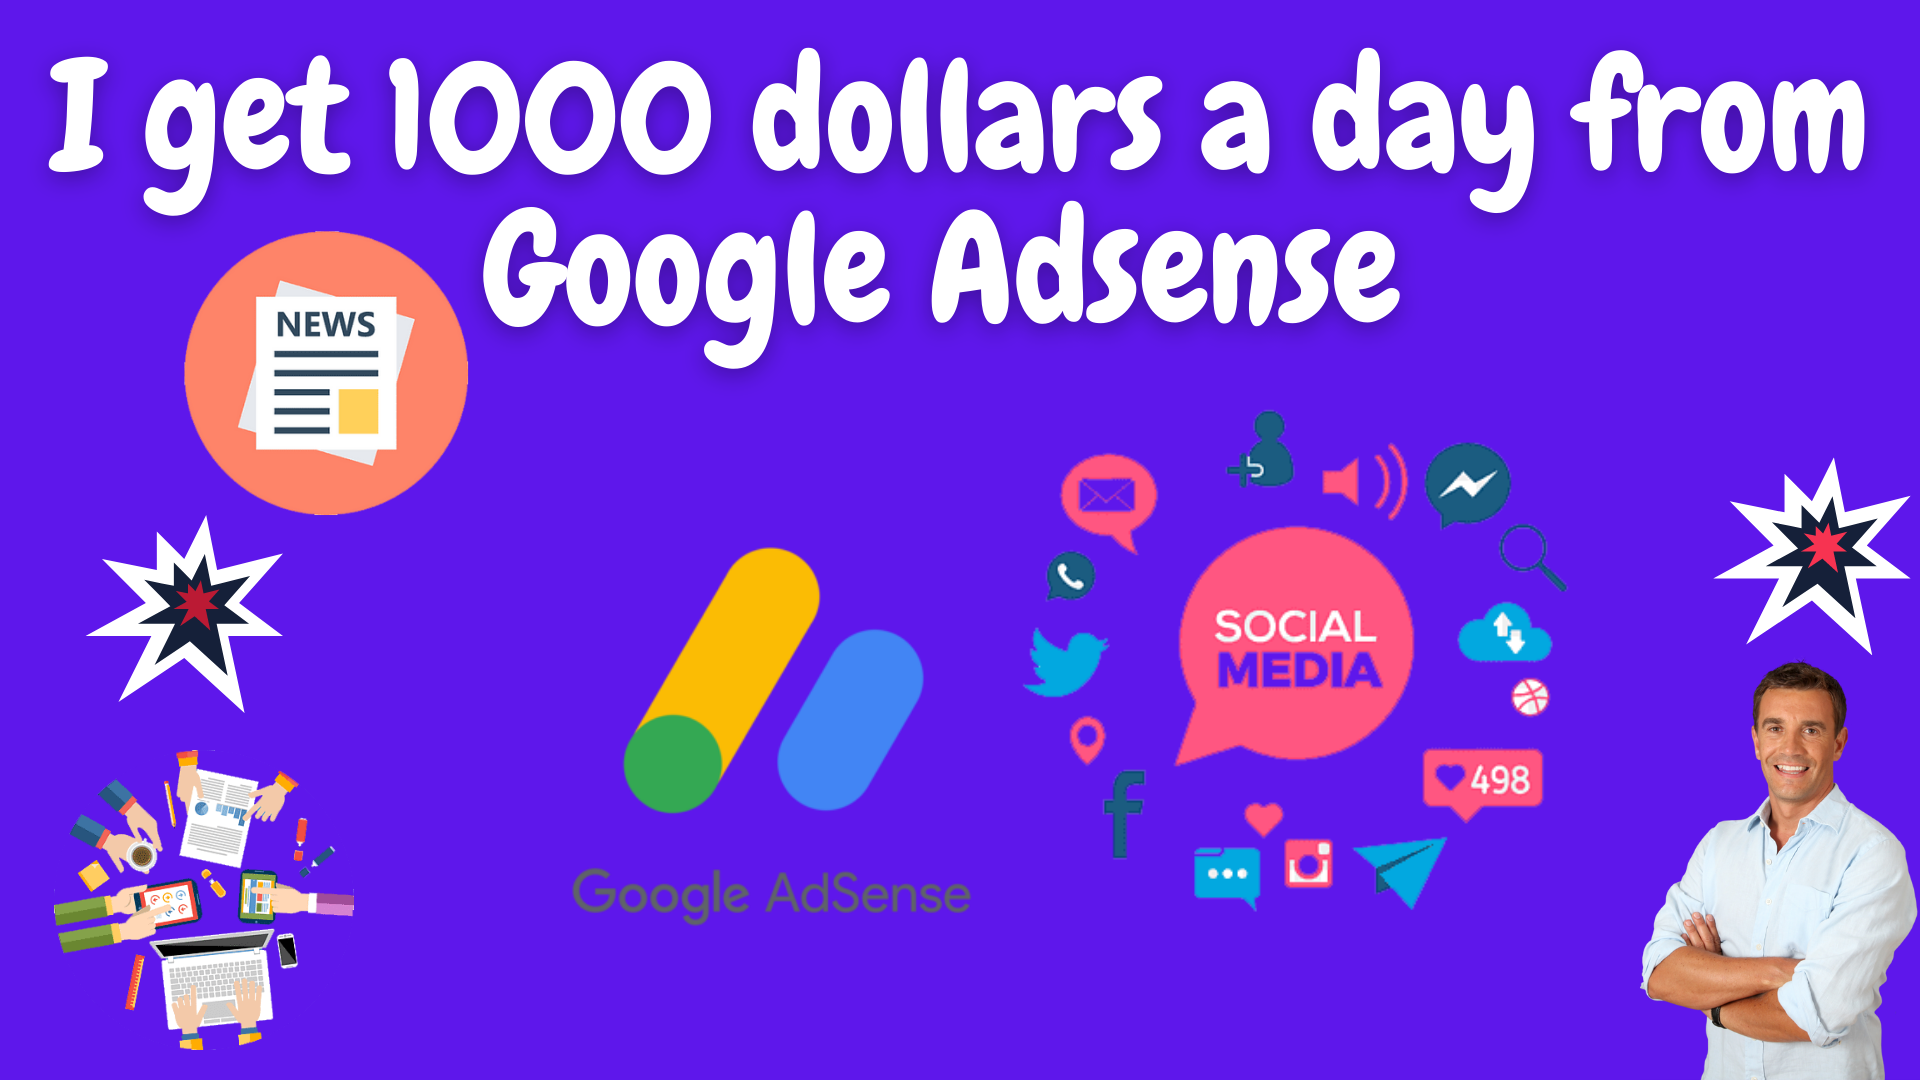 I Get 1000 Dollars A Day From Google Adsense&Nbsp;